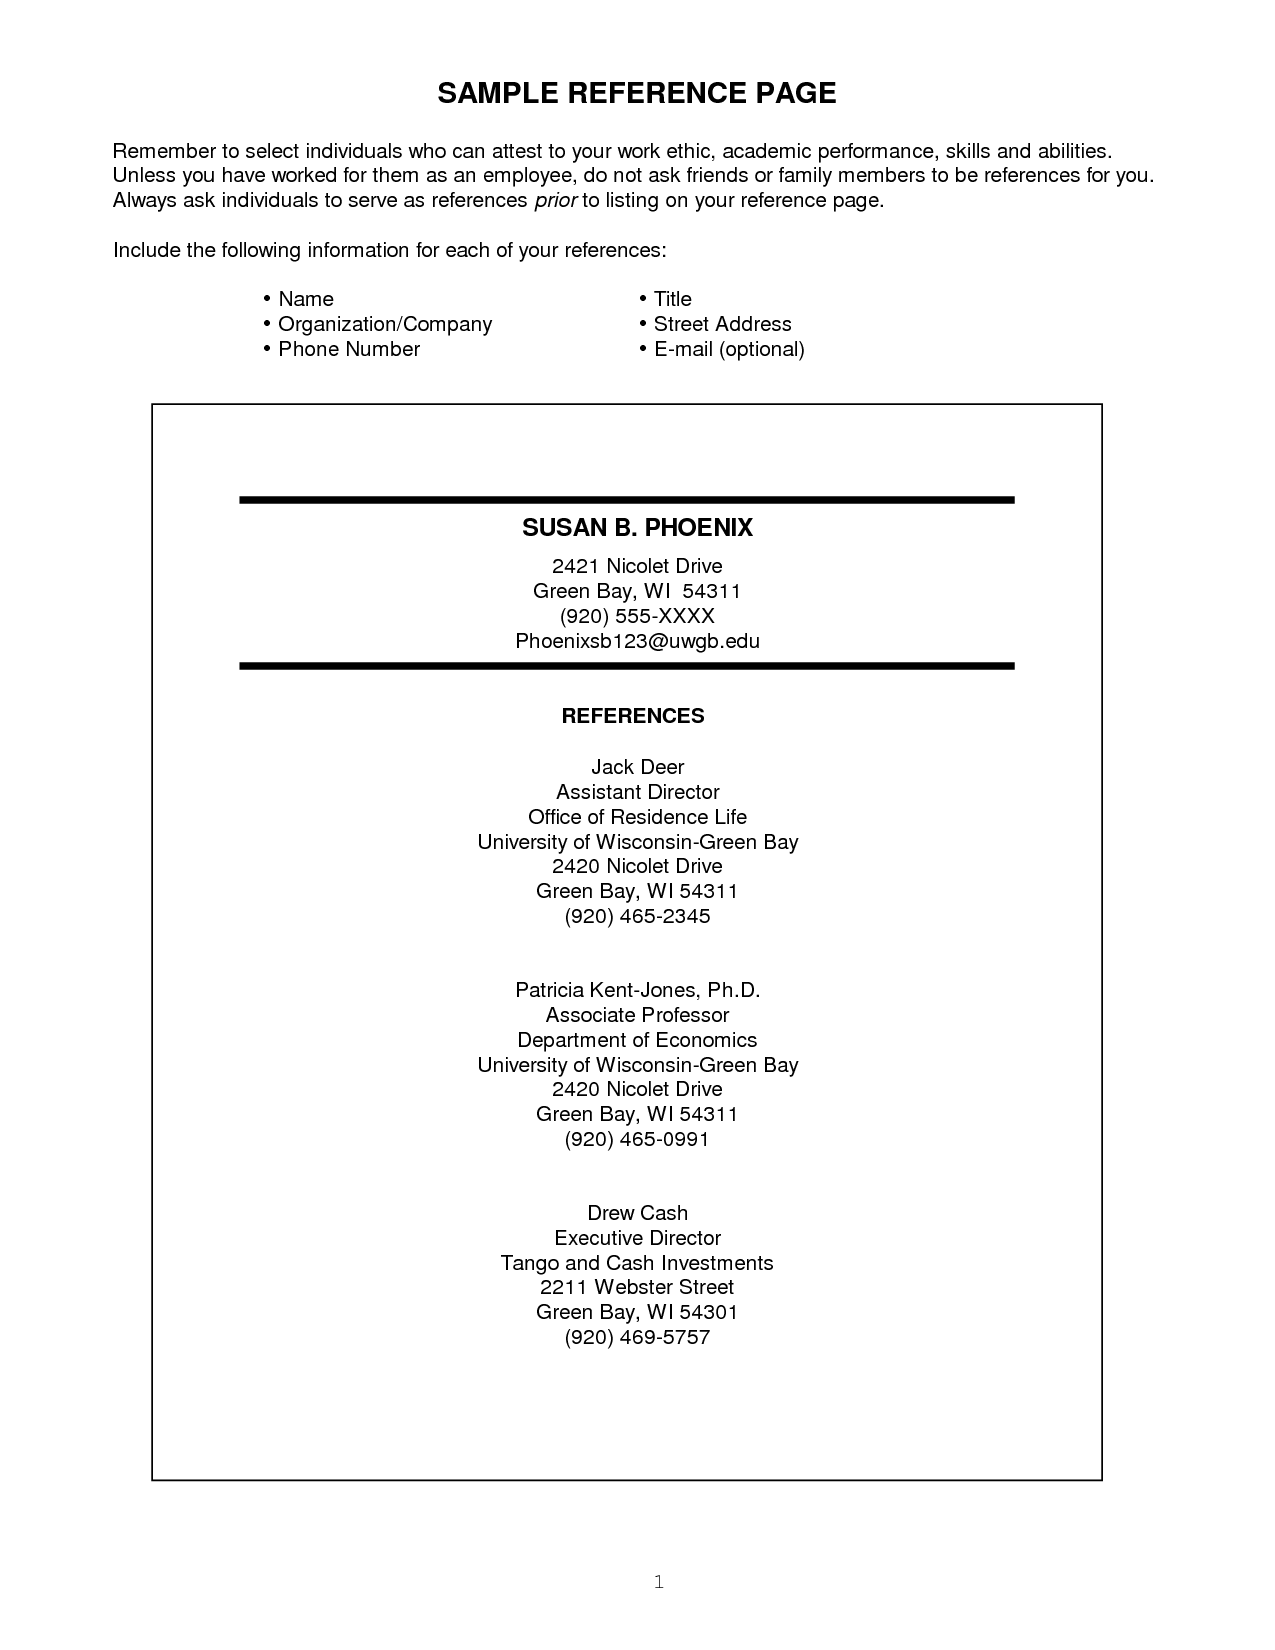 Resume Examples. references template for resume list of sheet 